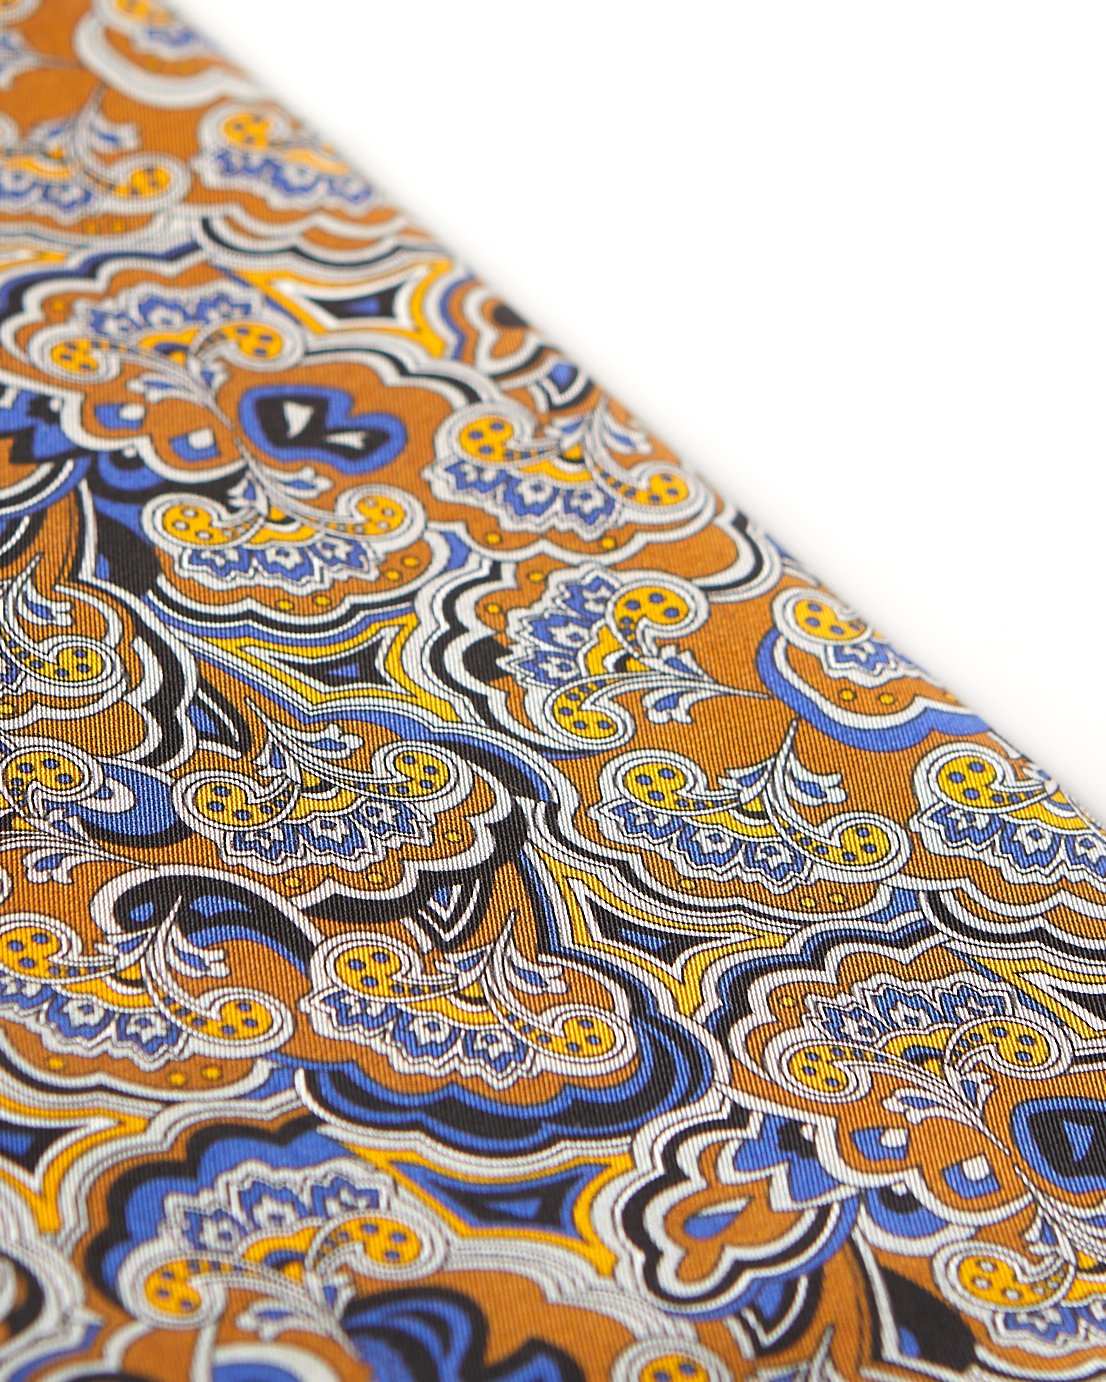 Angled view of the scarf, focussing on a segment of the paisley-inspired patterns in blue, orange, yellow, black and white.